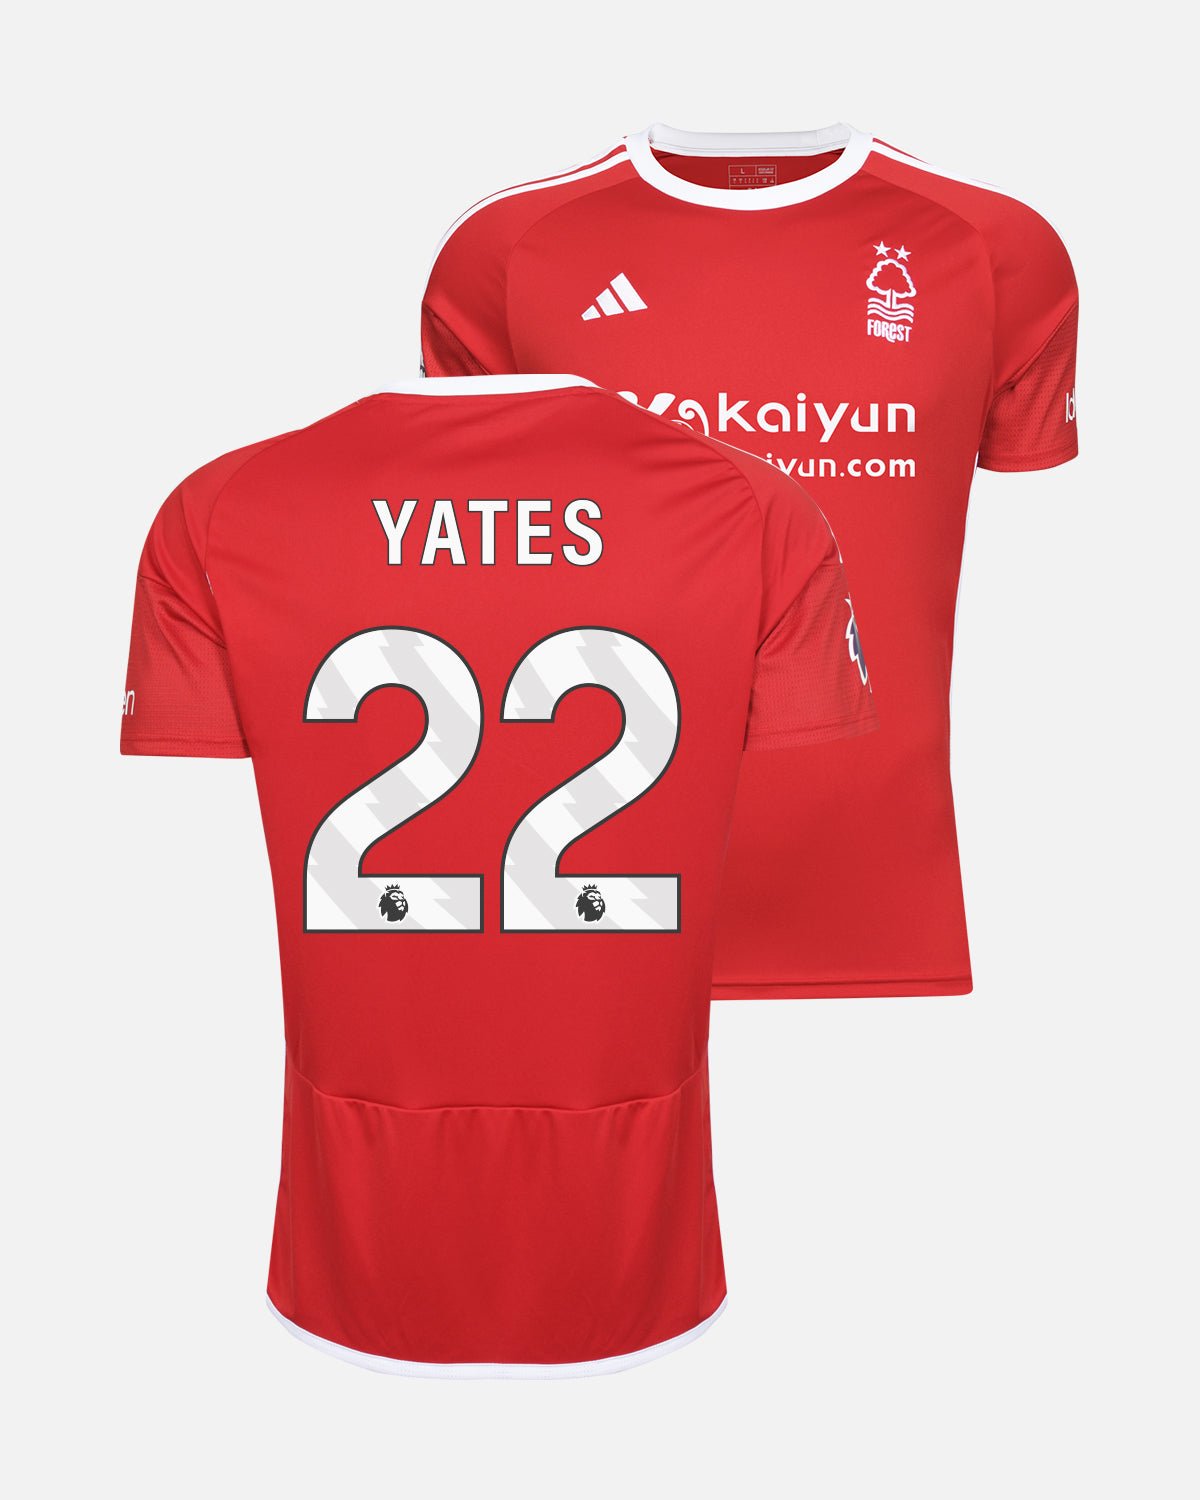 NFFC Home Shirt 23-24 - Yates 22 - Nottingham Forest FC